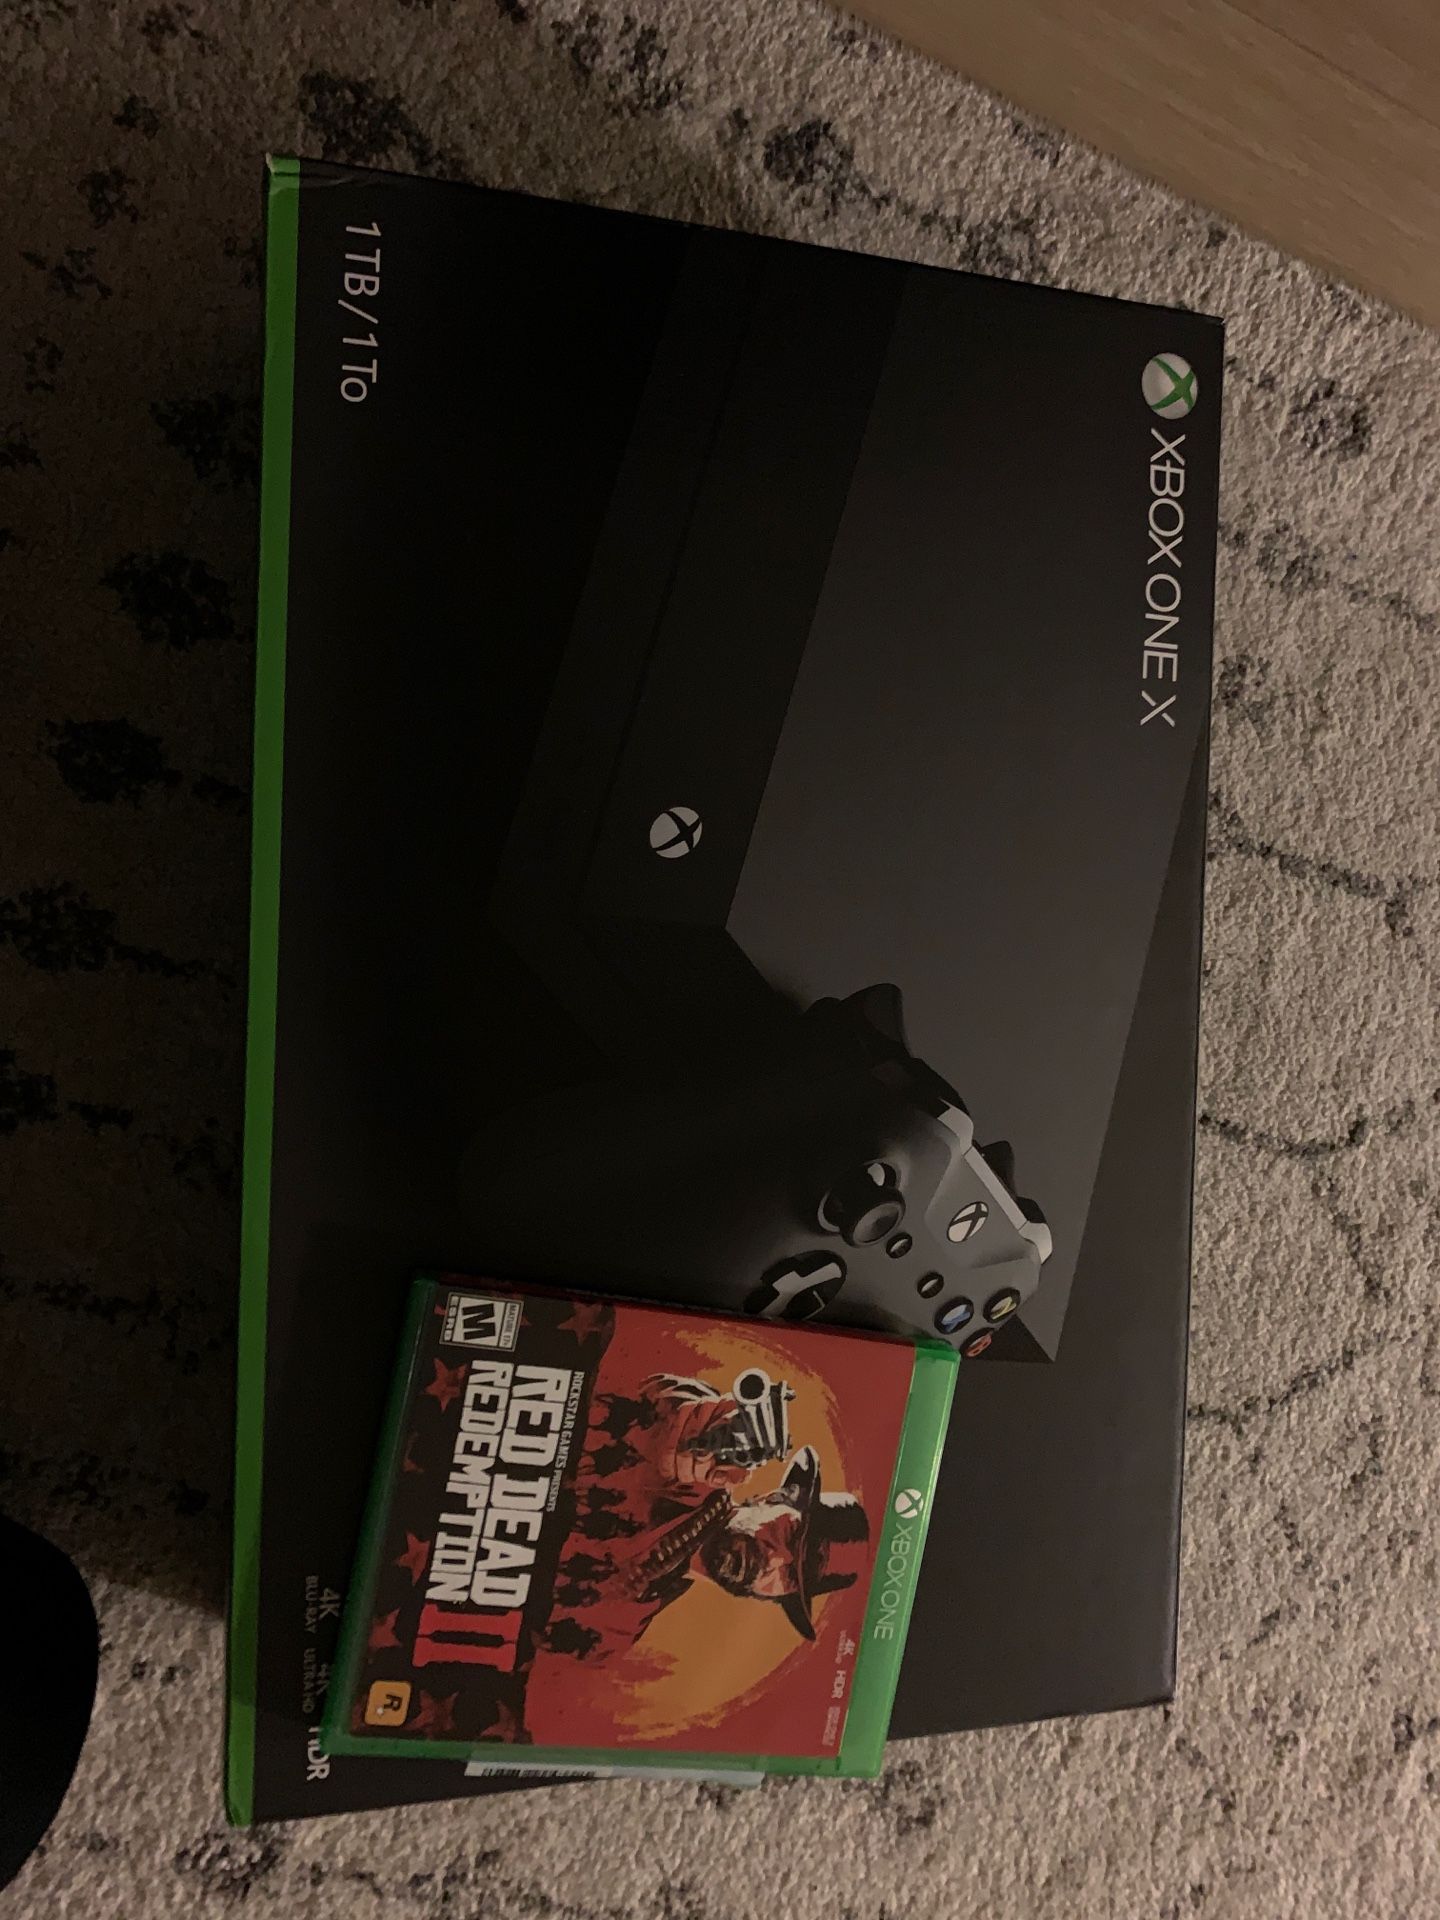 XBox One x PUBG with RDR2